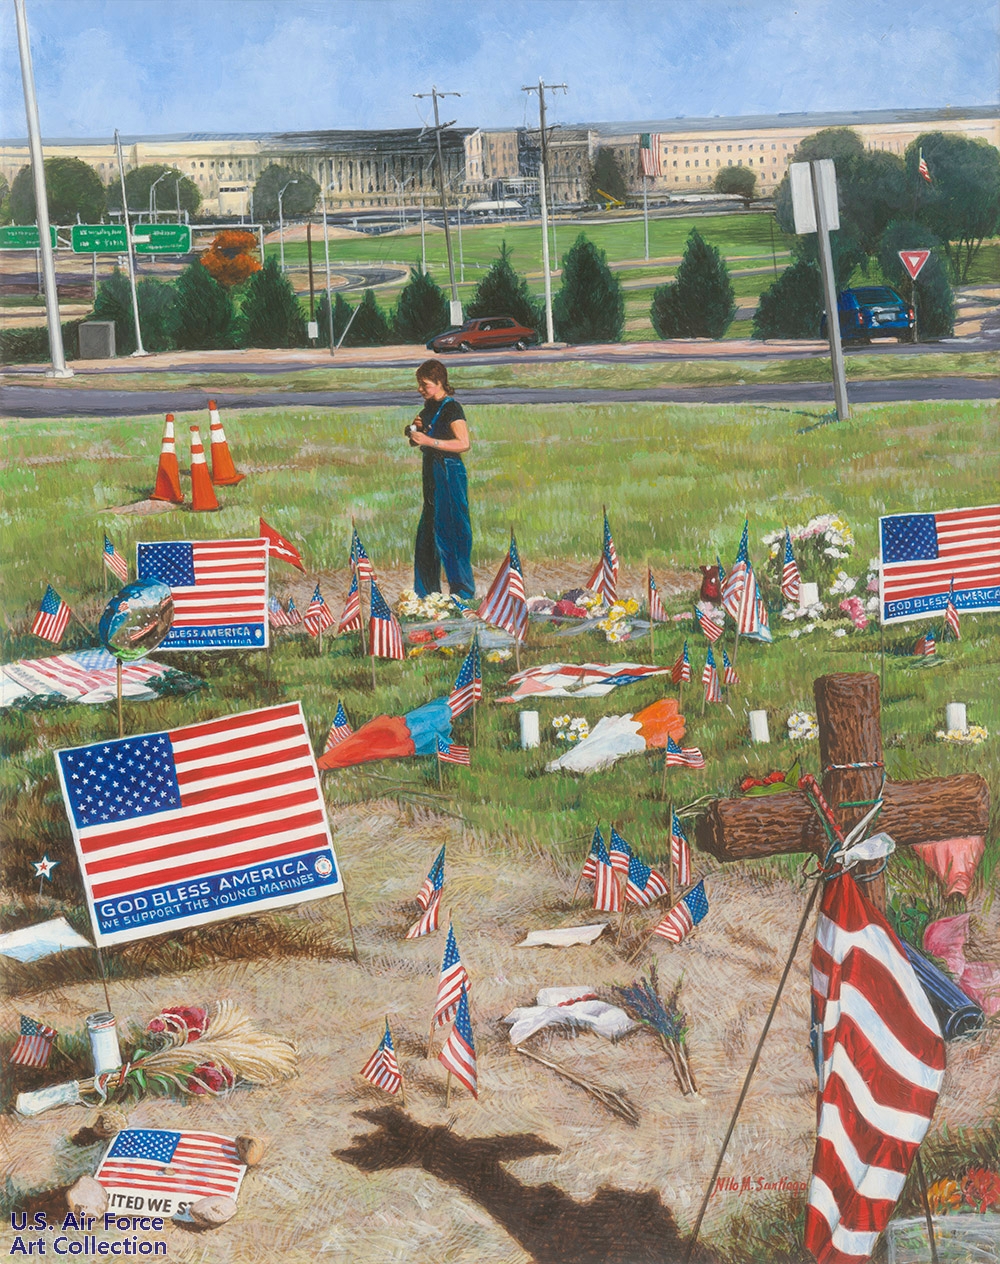 INSTANT SHRINE TO THE PENTAGON HEROES OF 9/11/01